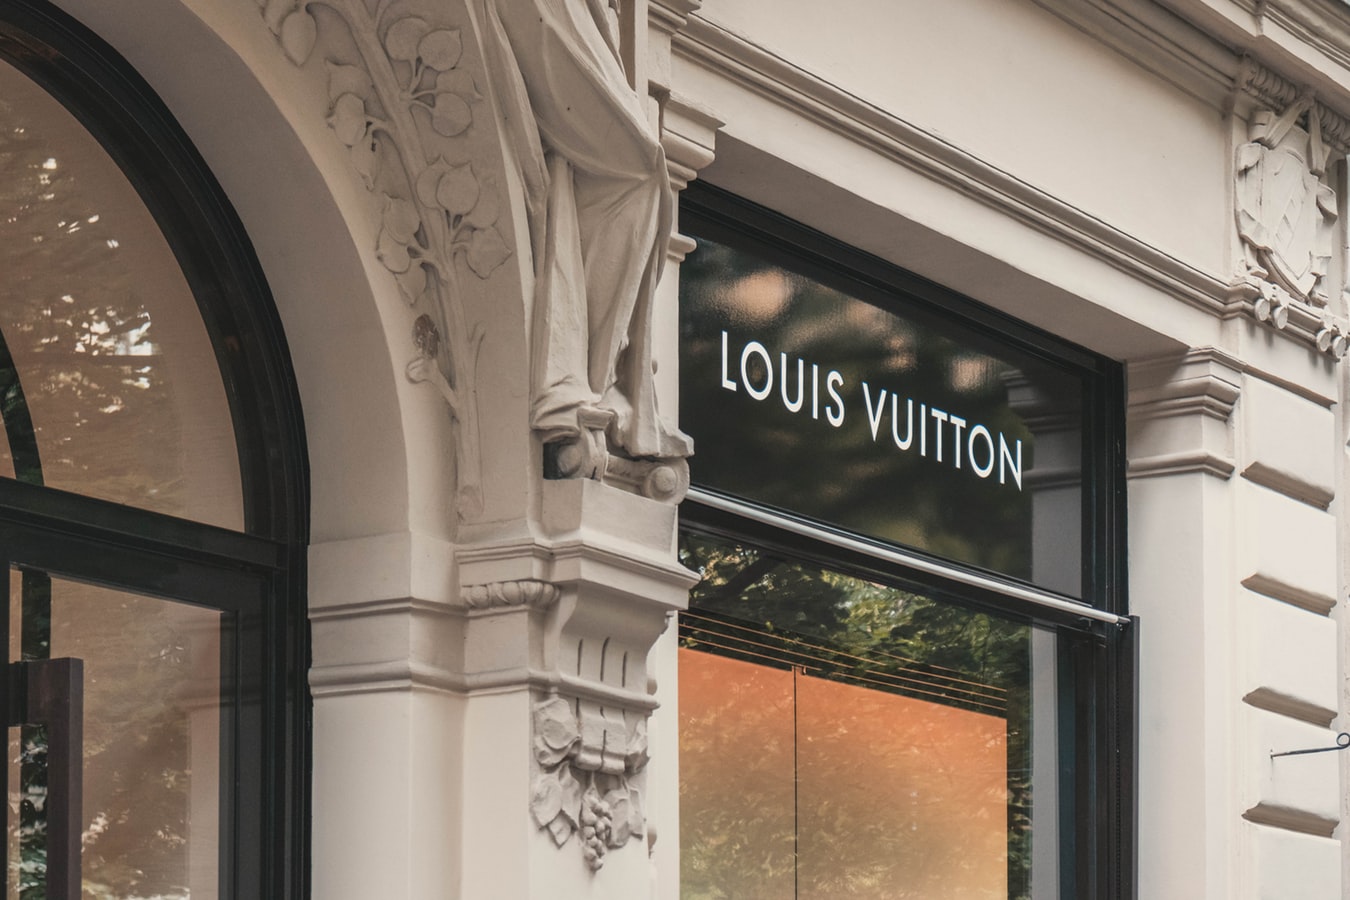 LVMH Chairman's Net Worth Up by $11.3 Billion on Tuesday Due to